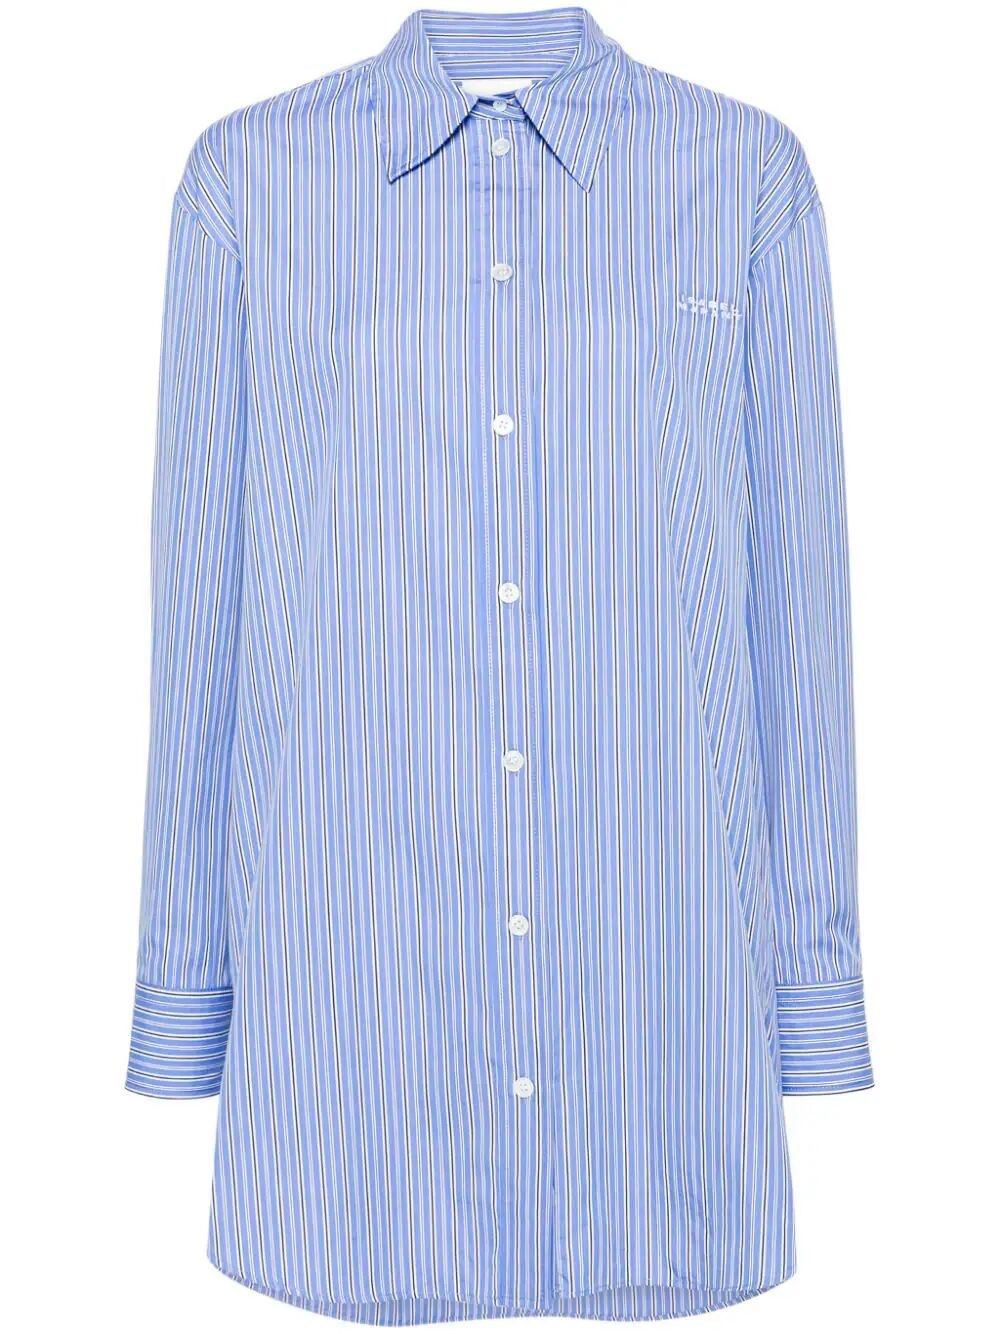 Isabel Marant Striped Shirt In Blue